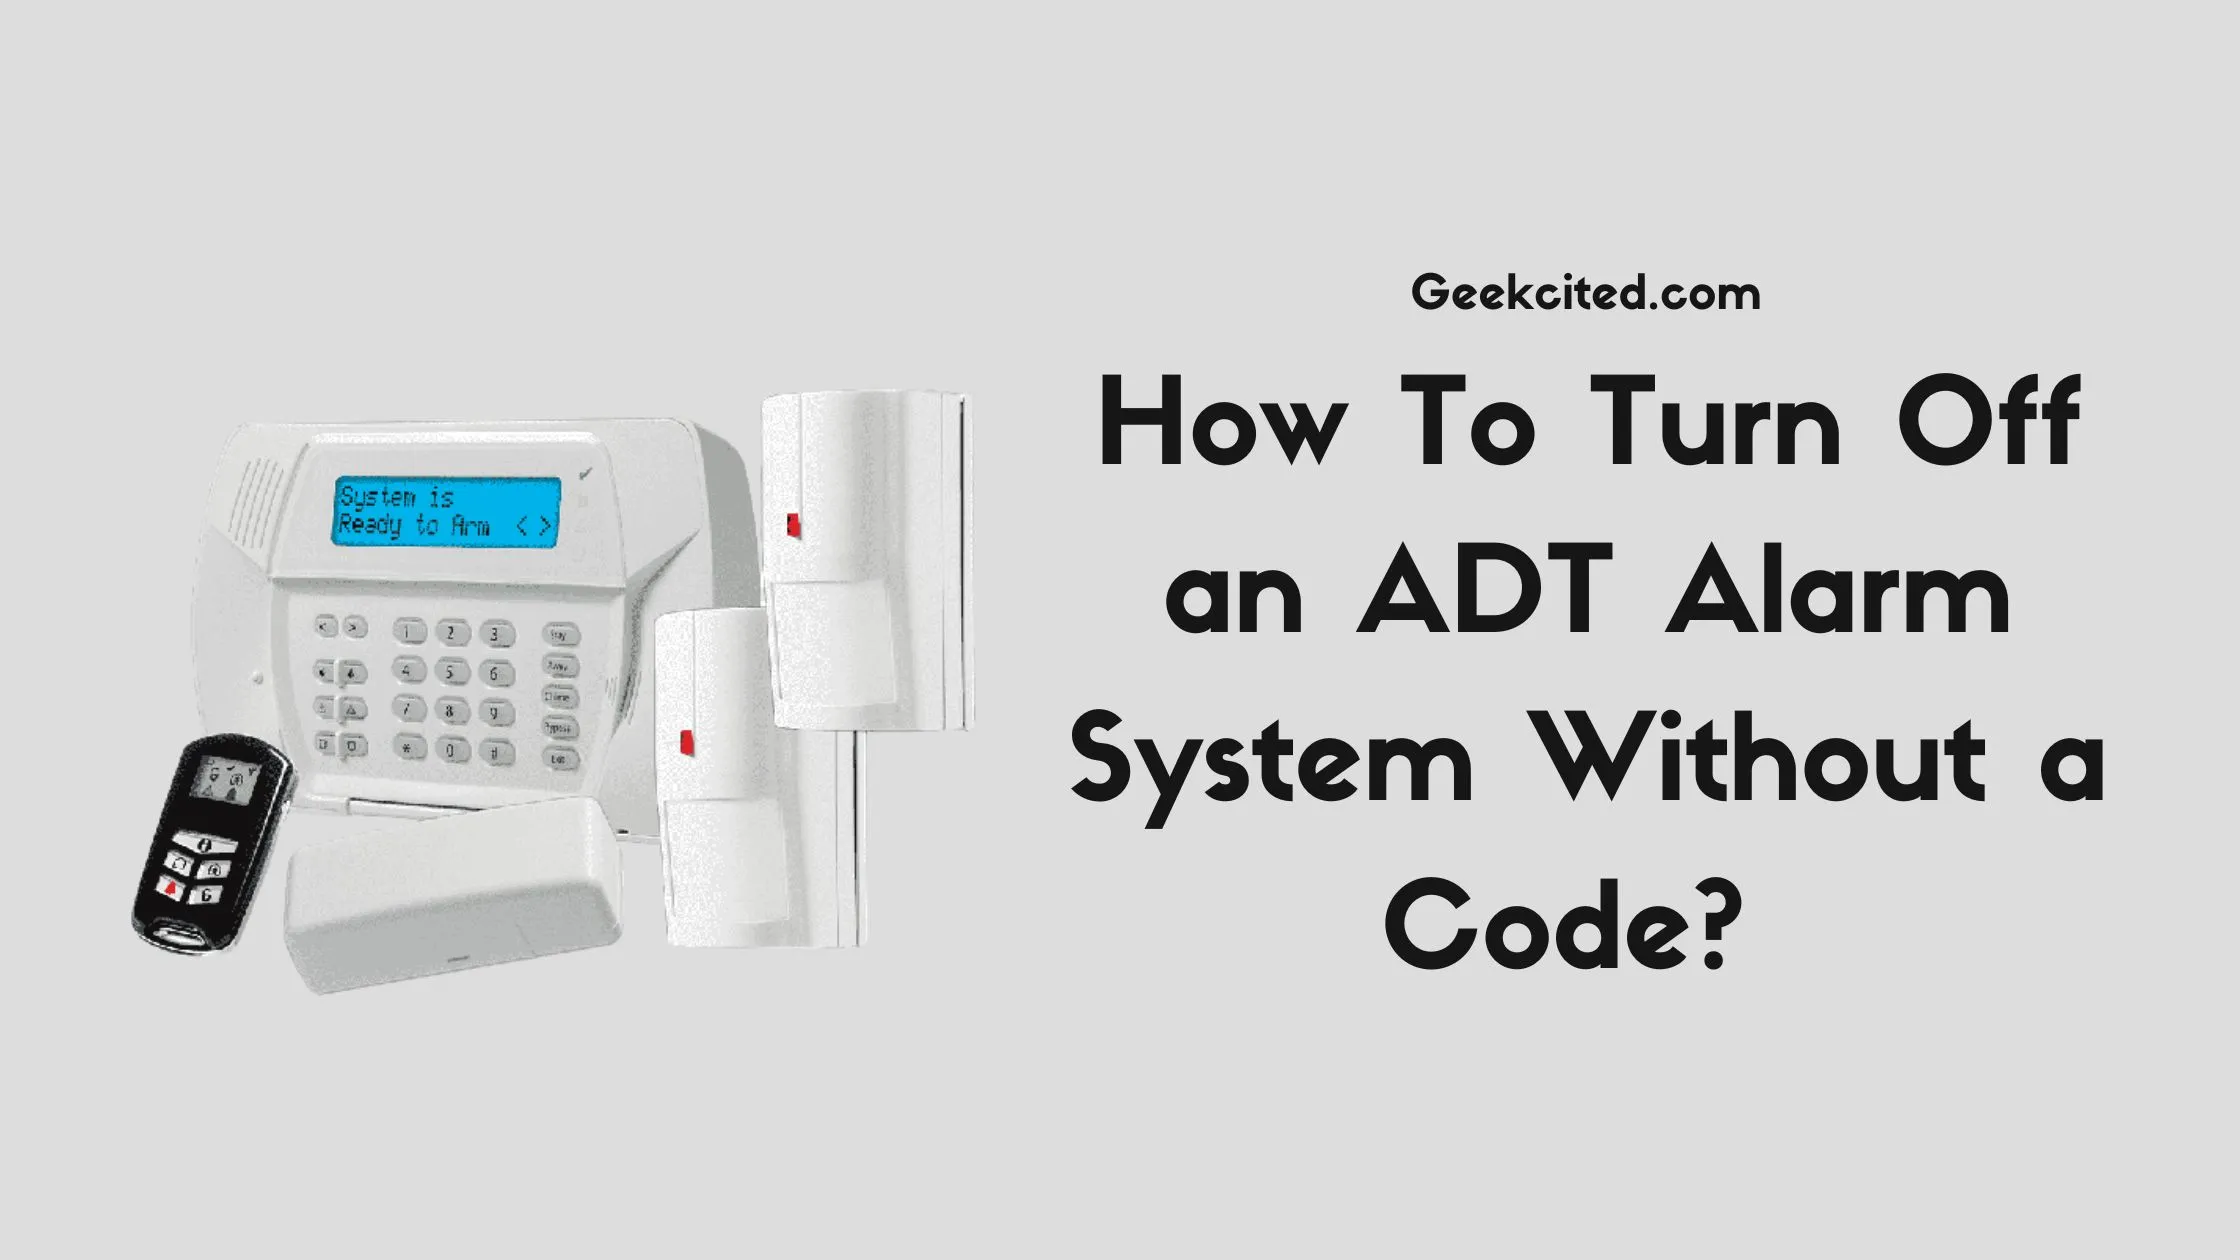 How To Turn Off an ADT Alarm System Without a Code